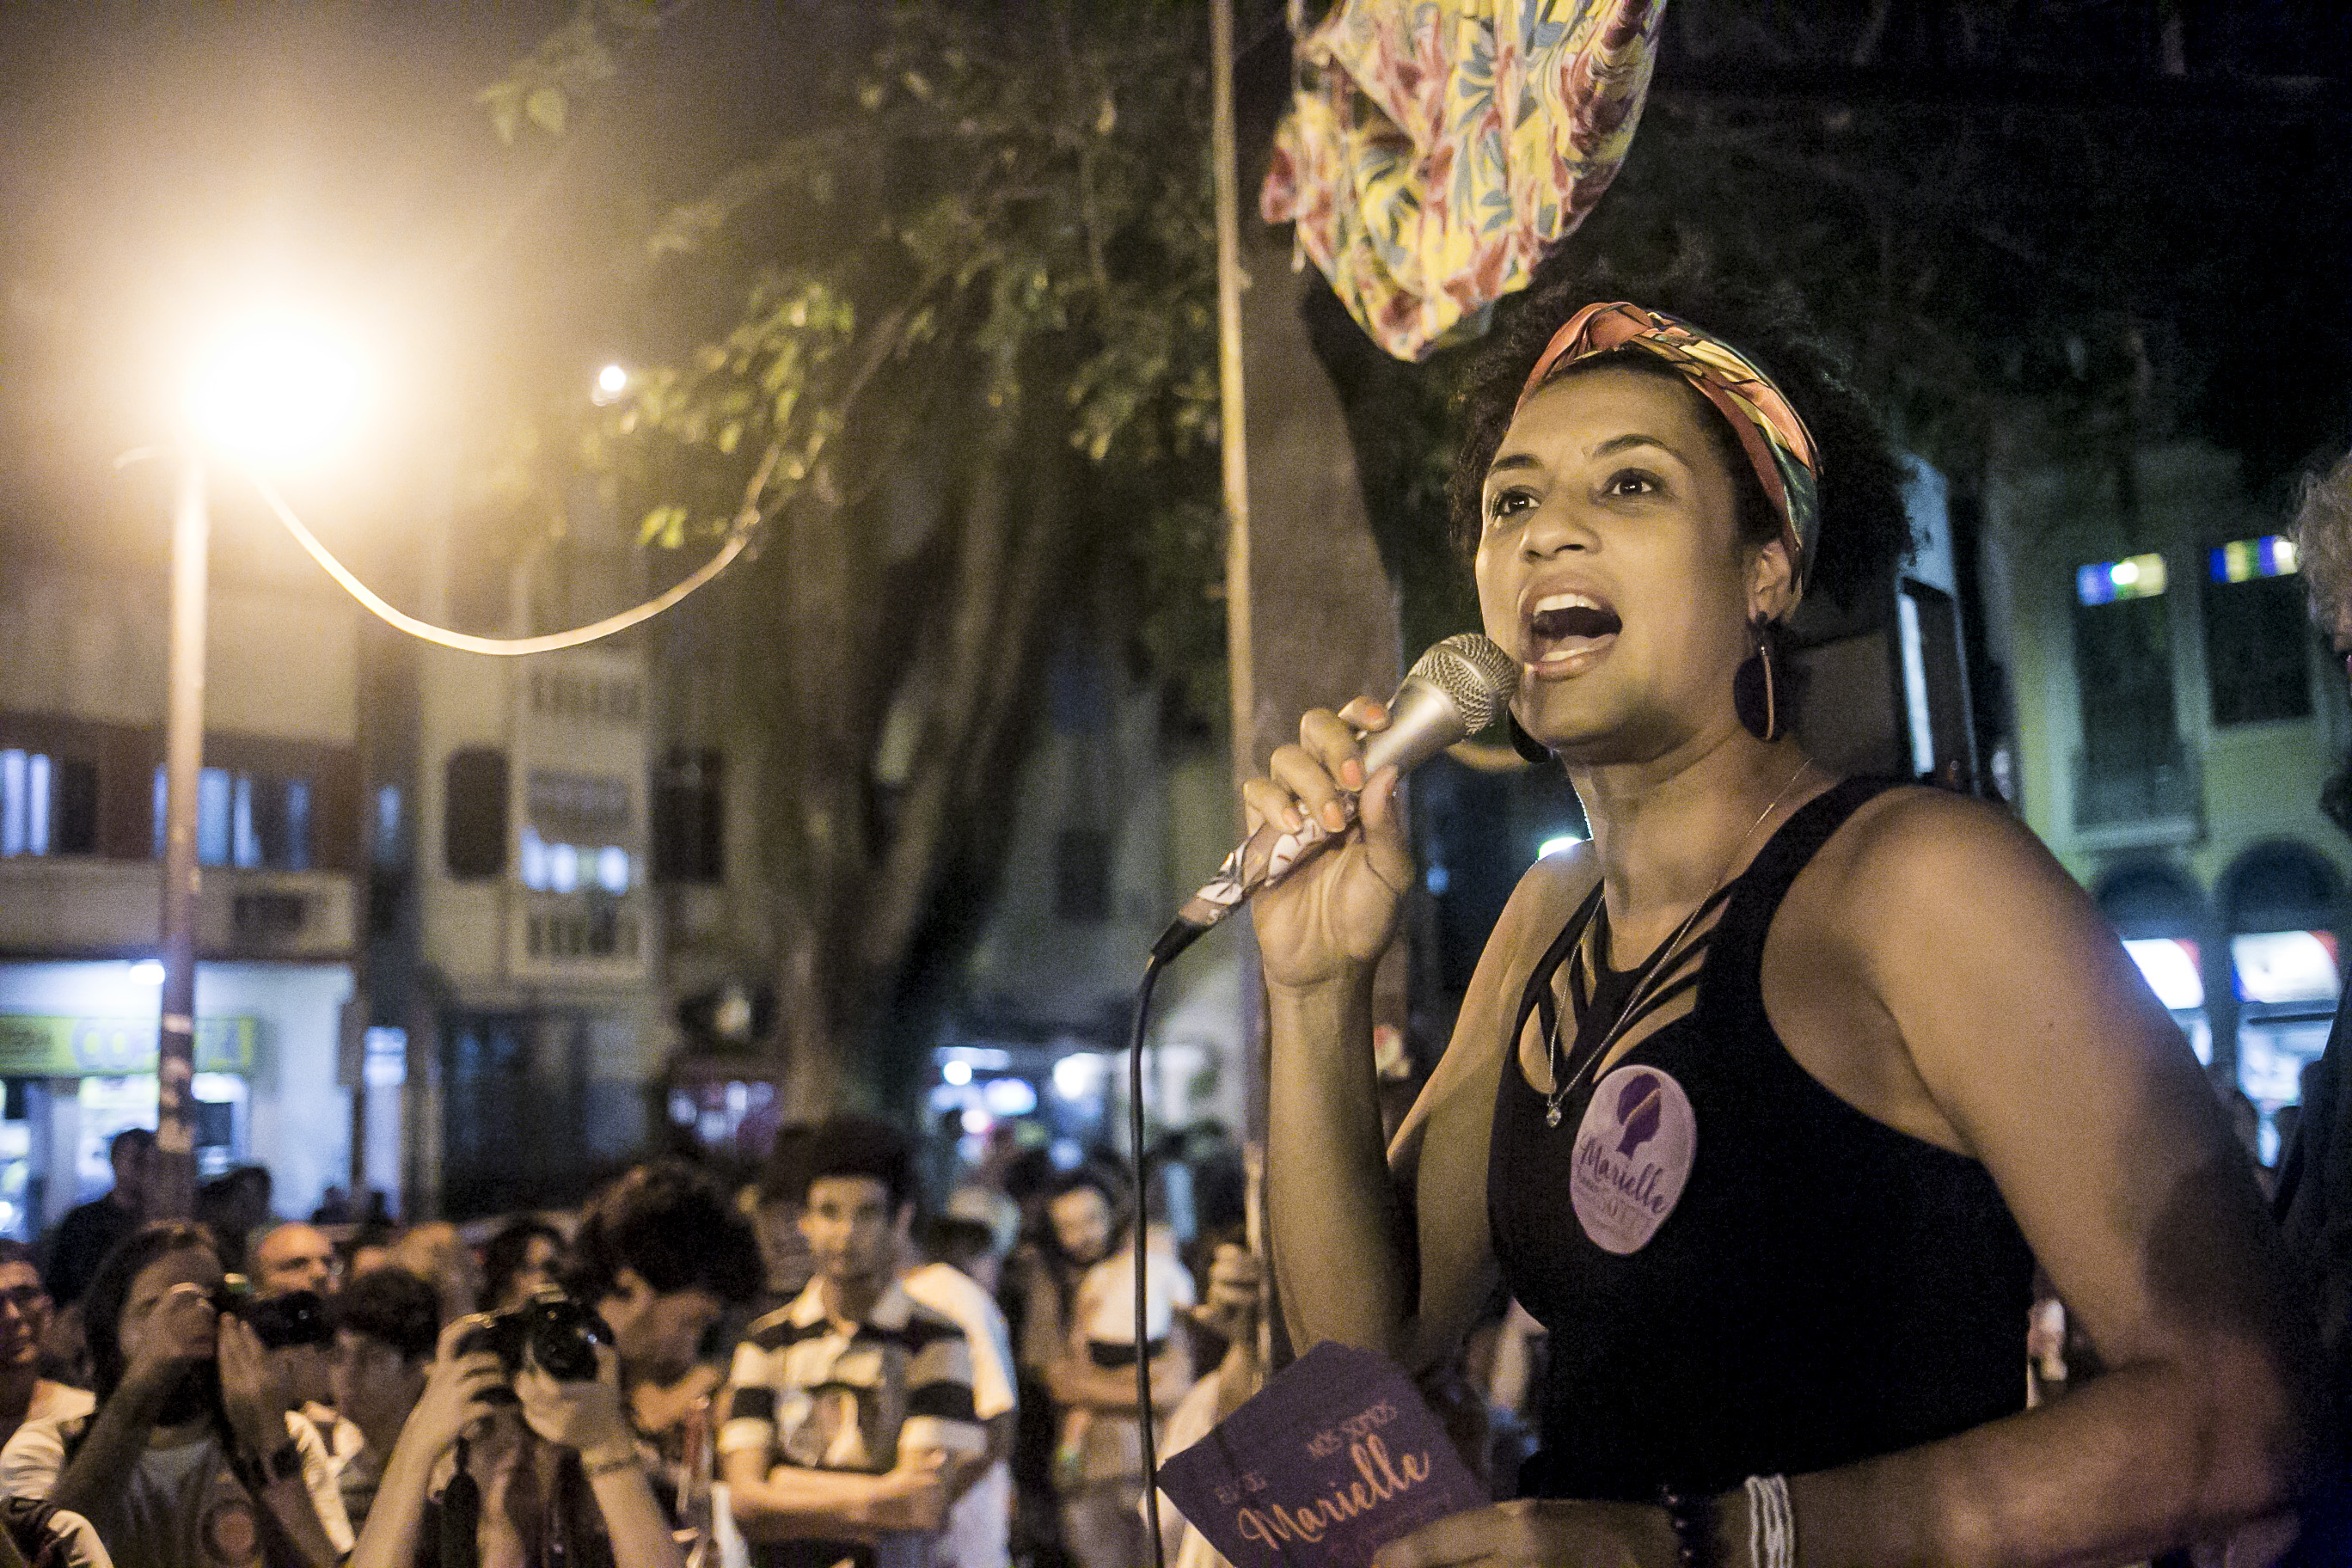 Militia groups concerned over her interference in land disputes deemed responsible for Marielle Franco’s assassination